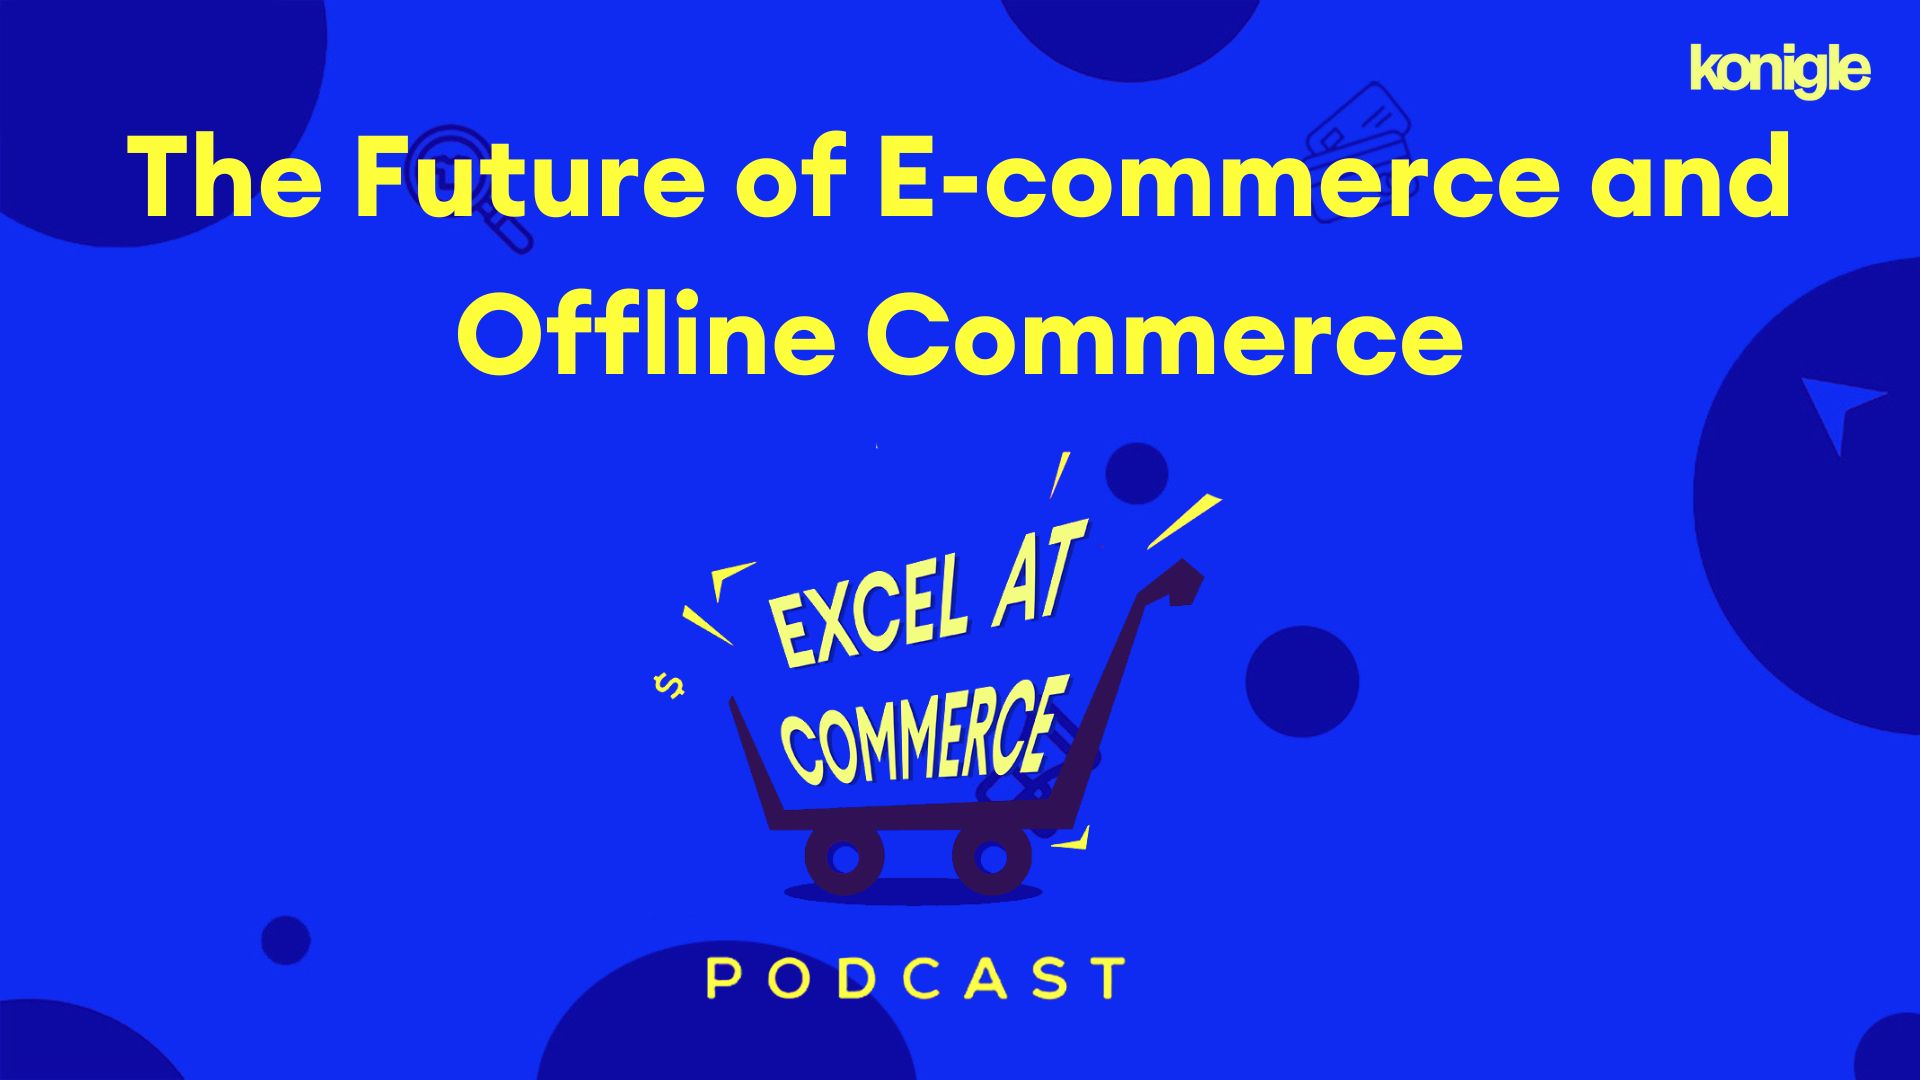 The Future of E-commerce and Offline Commerce